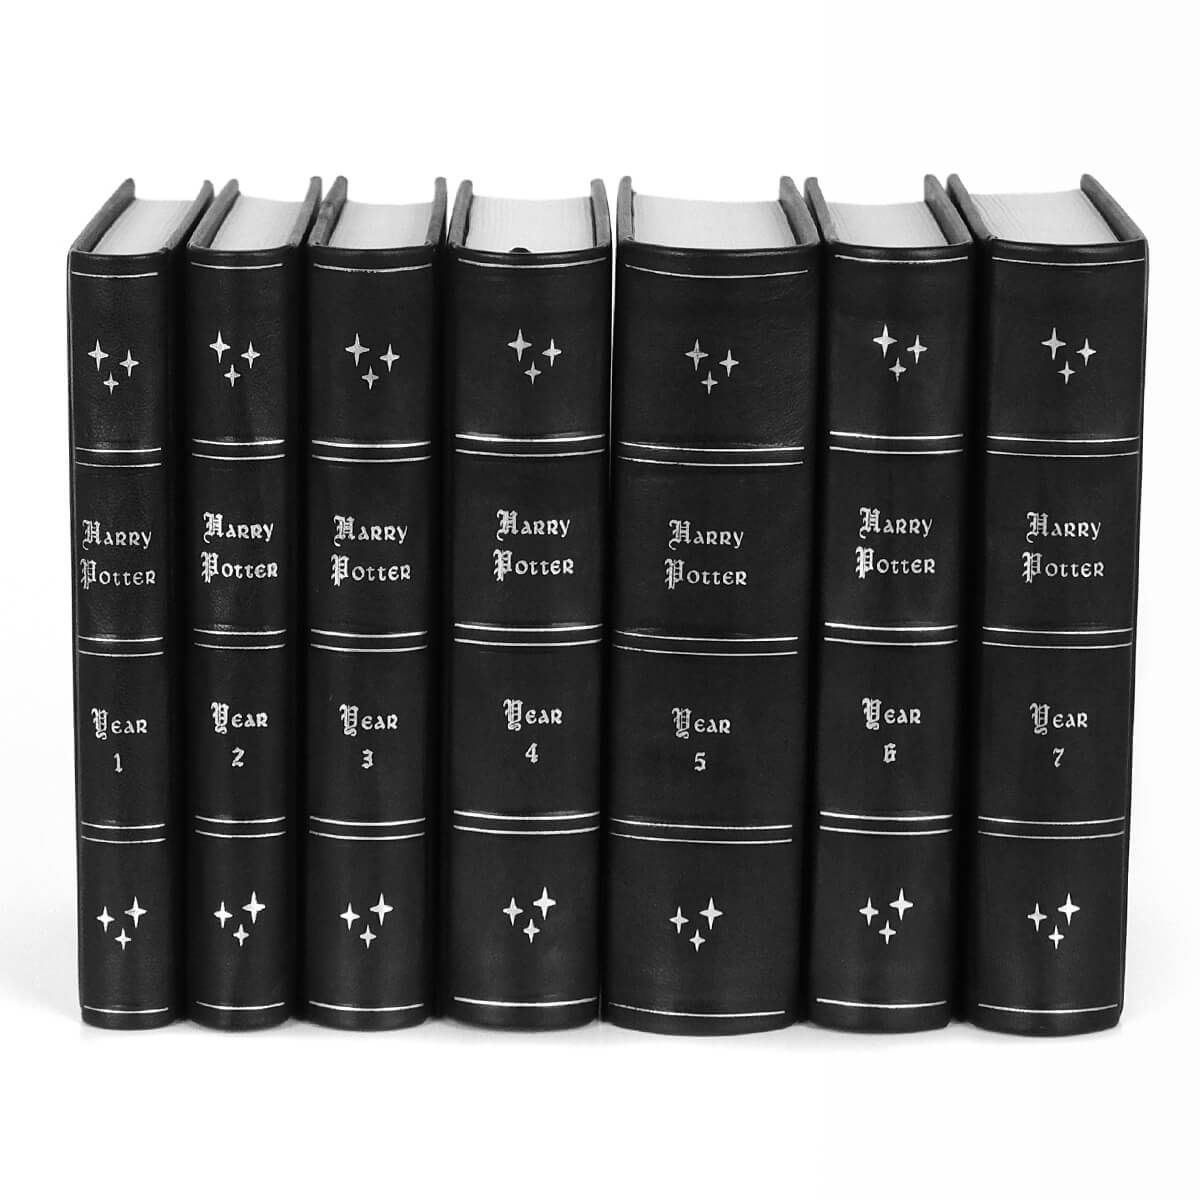 Genuine black leather Harry Potter from Juniper Books with silver book titles, silver ornaments, and  silver stars on spines.